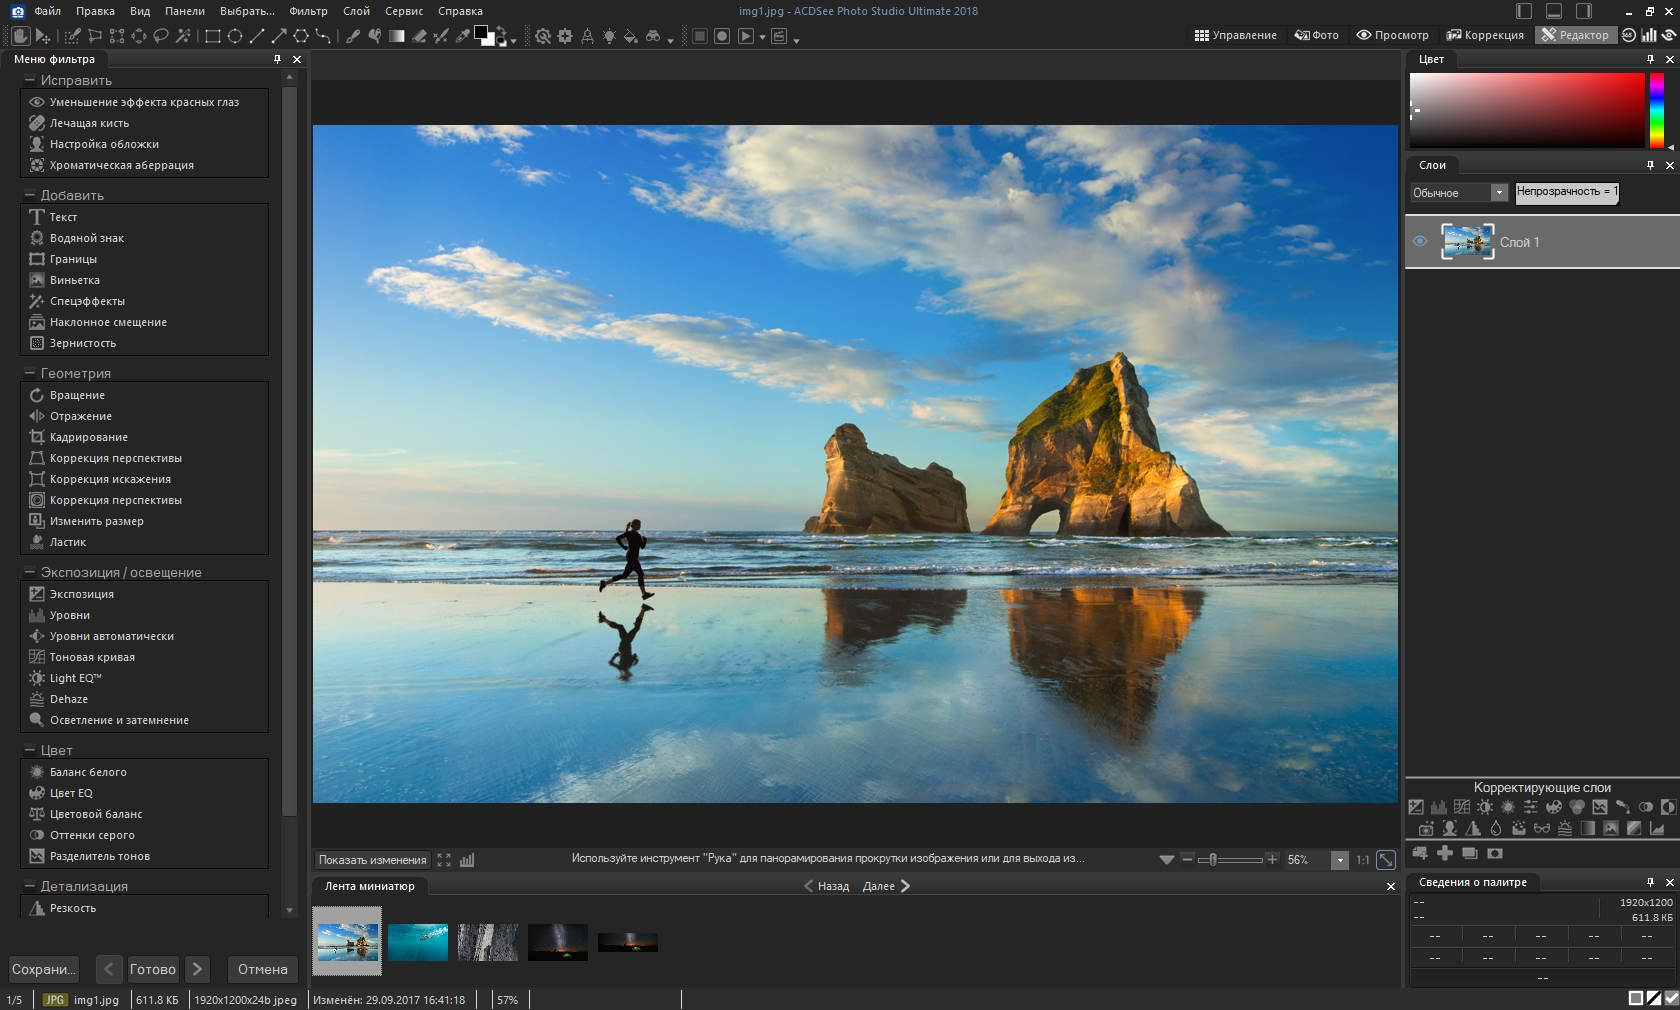 acdsee photo studio ultimate 2018 review